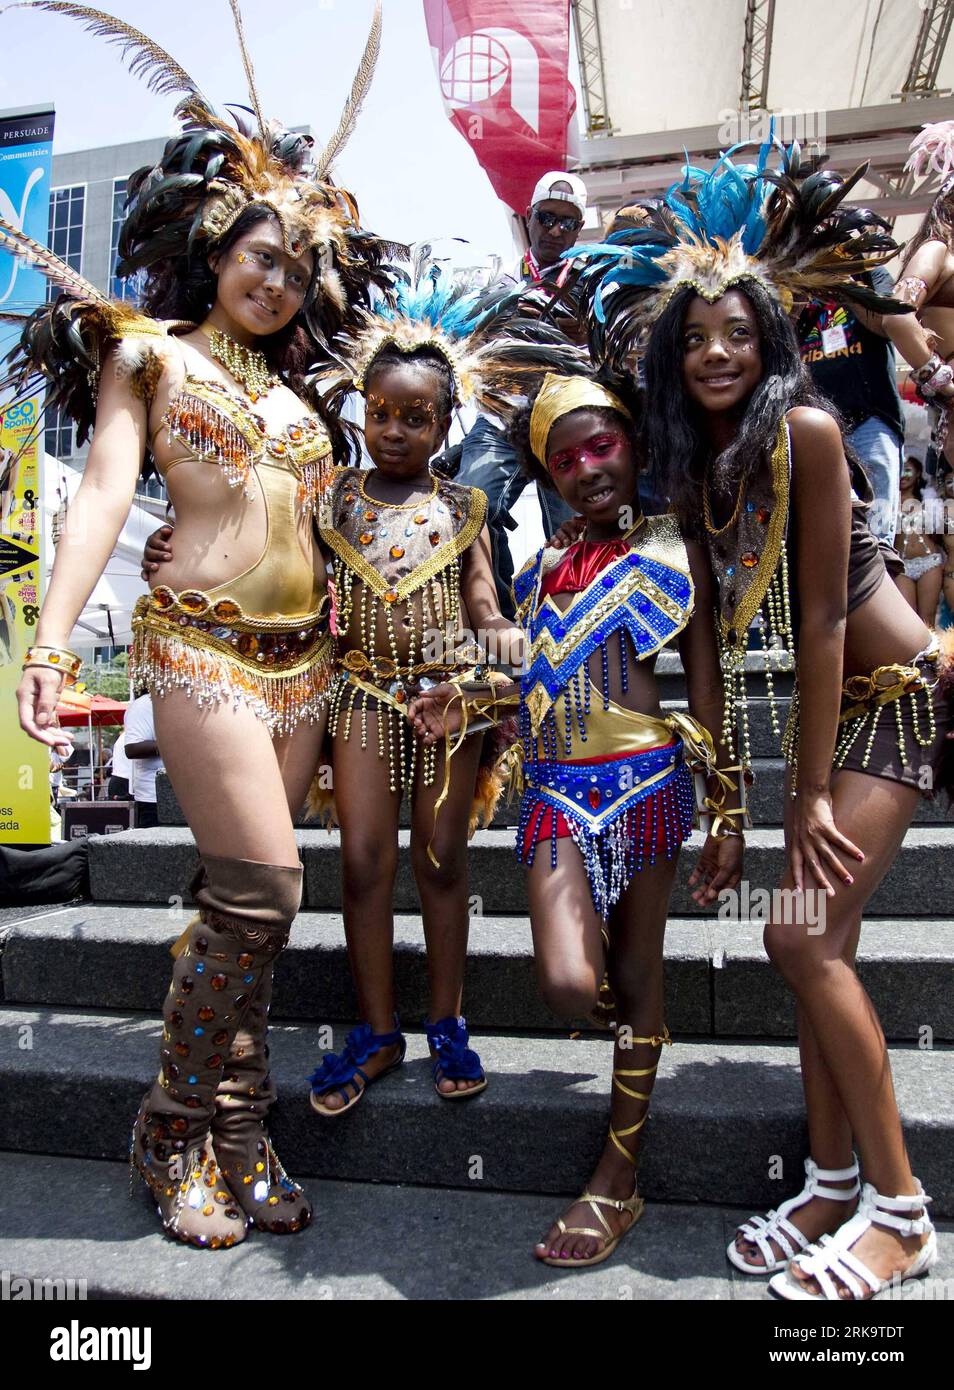 Bildnummer: 54230774  Datum: 15.07.2010  Copyright: imago/Xinhua  Performers pose for photos during the opening ceremony of the 43rd annual Caribana Toronto Festival in Toronto, Canada, July 15, 2010. The festival kicked off here on Thursday. (Xinhua/Zou Zheng) (gj) (5)CANADA-TORONTO-CARIBANA FESTIVAL PUBLICATIONxNOTxINxCHN Gesellschaft Tradition Feste premiumd xint kbdig xsk 2010 hoch    Bildnummer 54230774 Date 15 07 2010 Copyright Imago XINHUA Performers Pose for Photos during The Opening Ceremony of The 43rd Annual  Toronto Festival in Toronto Canada July 15 2010 The Festival kicked off He Stock Photo